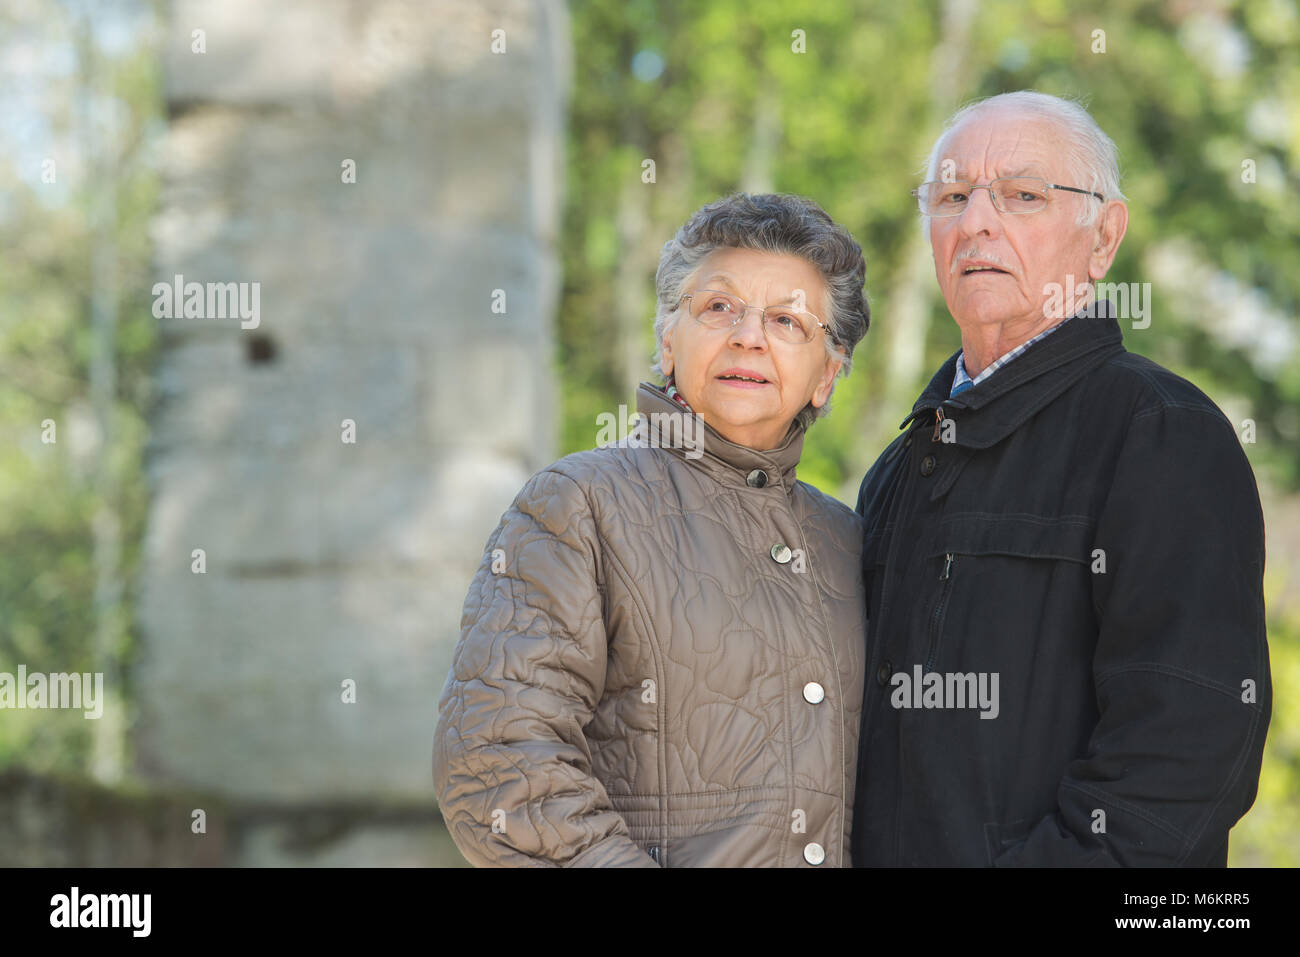 Senior citizen's pair [], 60 +, old, old, old woman, old women